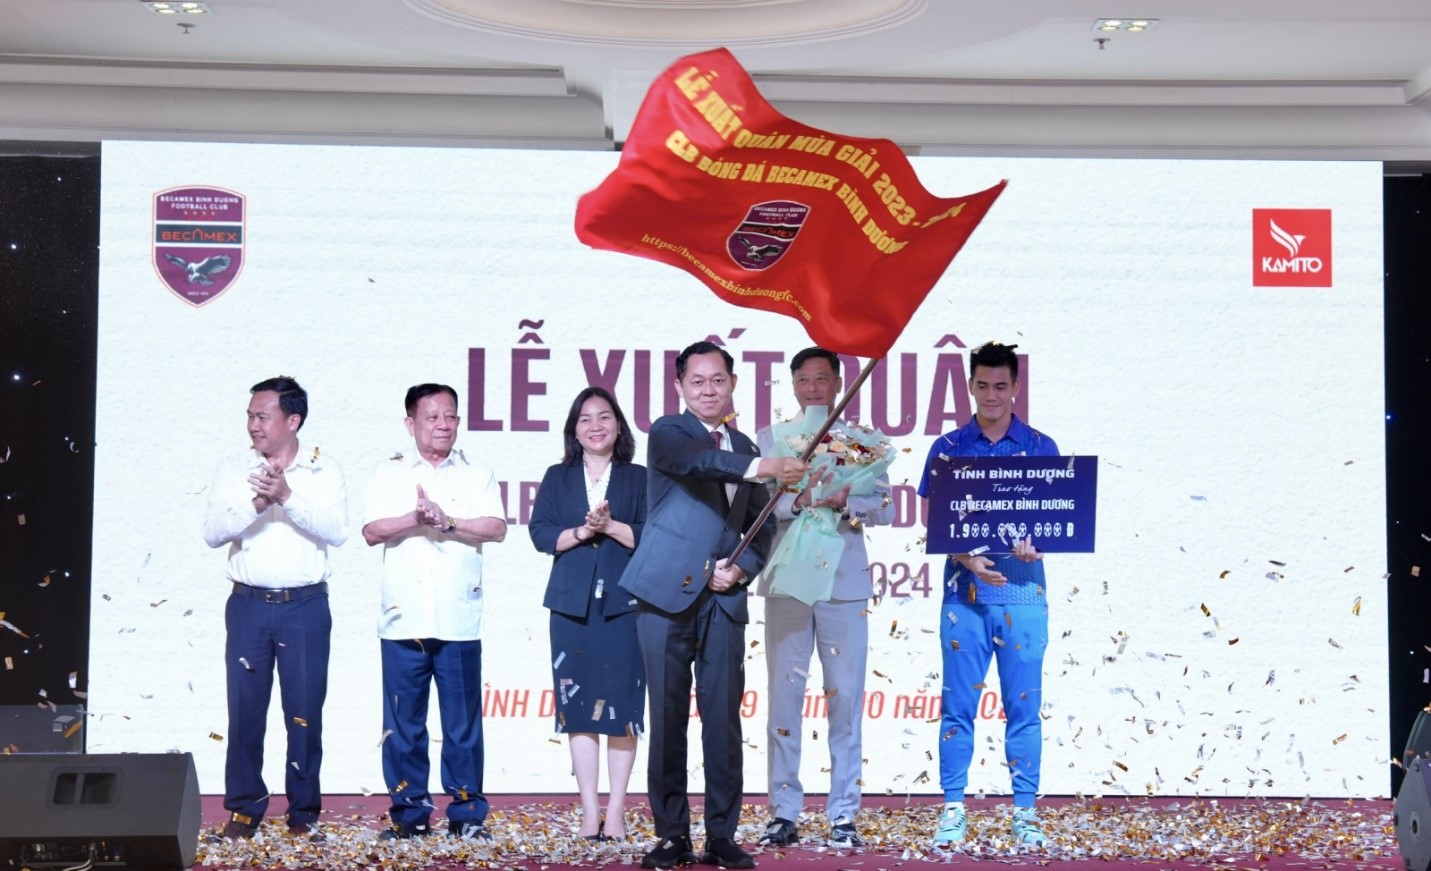 Mr. Ho Hong Thach, Chairman of the Board of Directors of Becamex Binh Duong Football Club Joint Stock Company raised the flag.